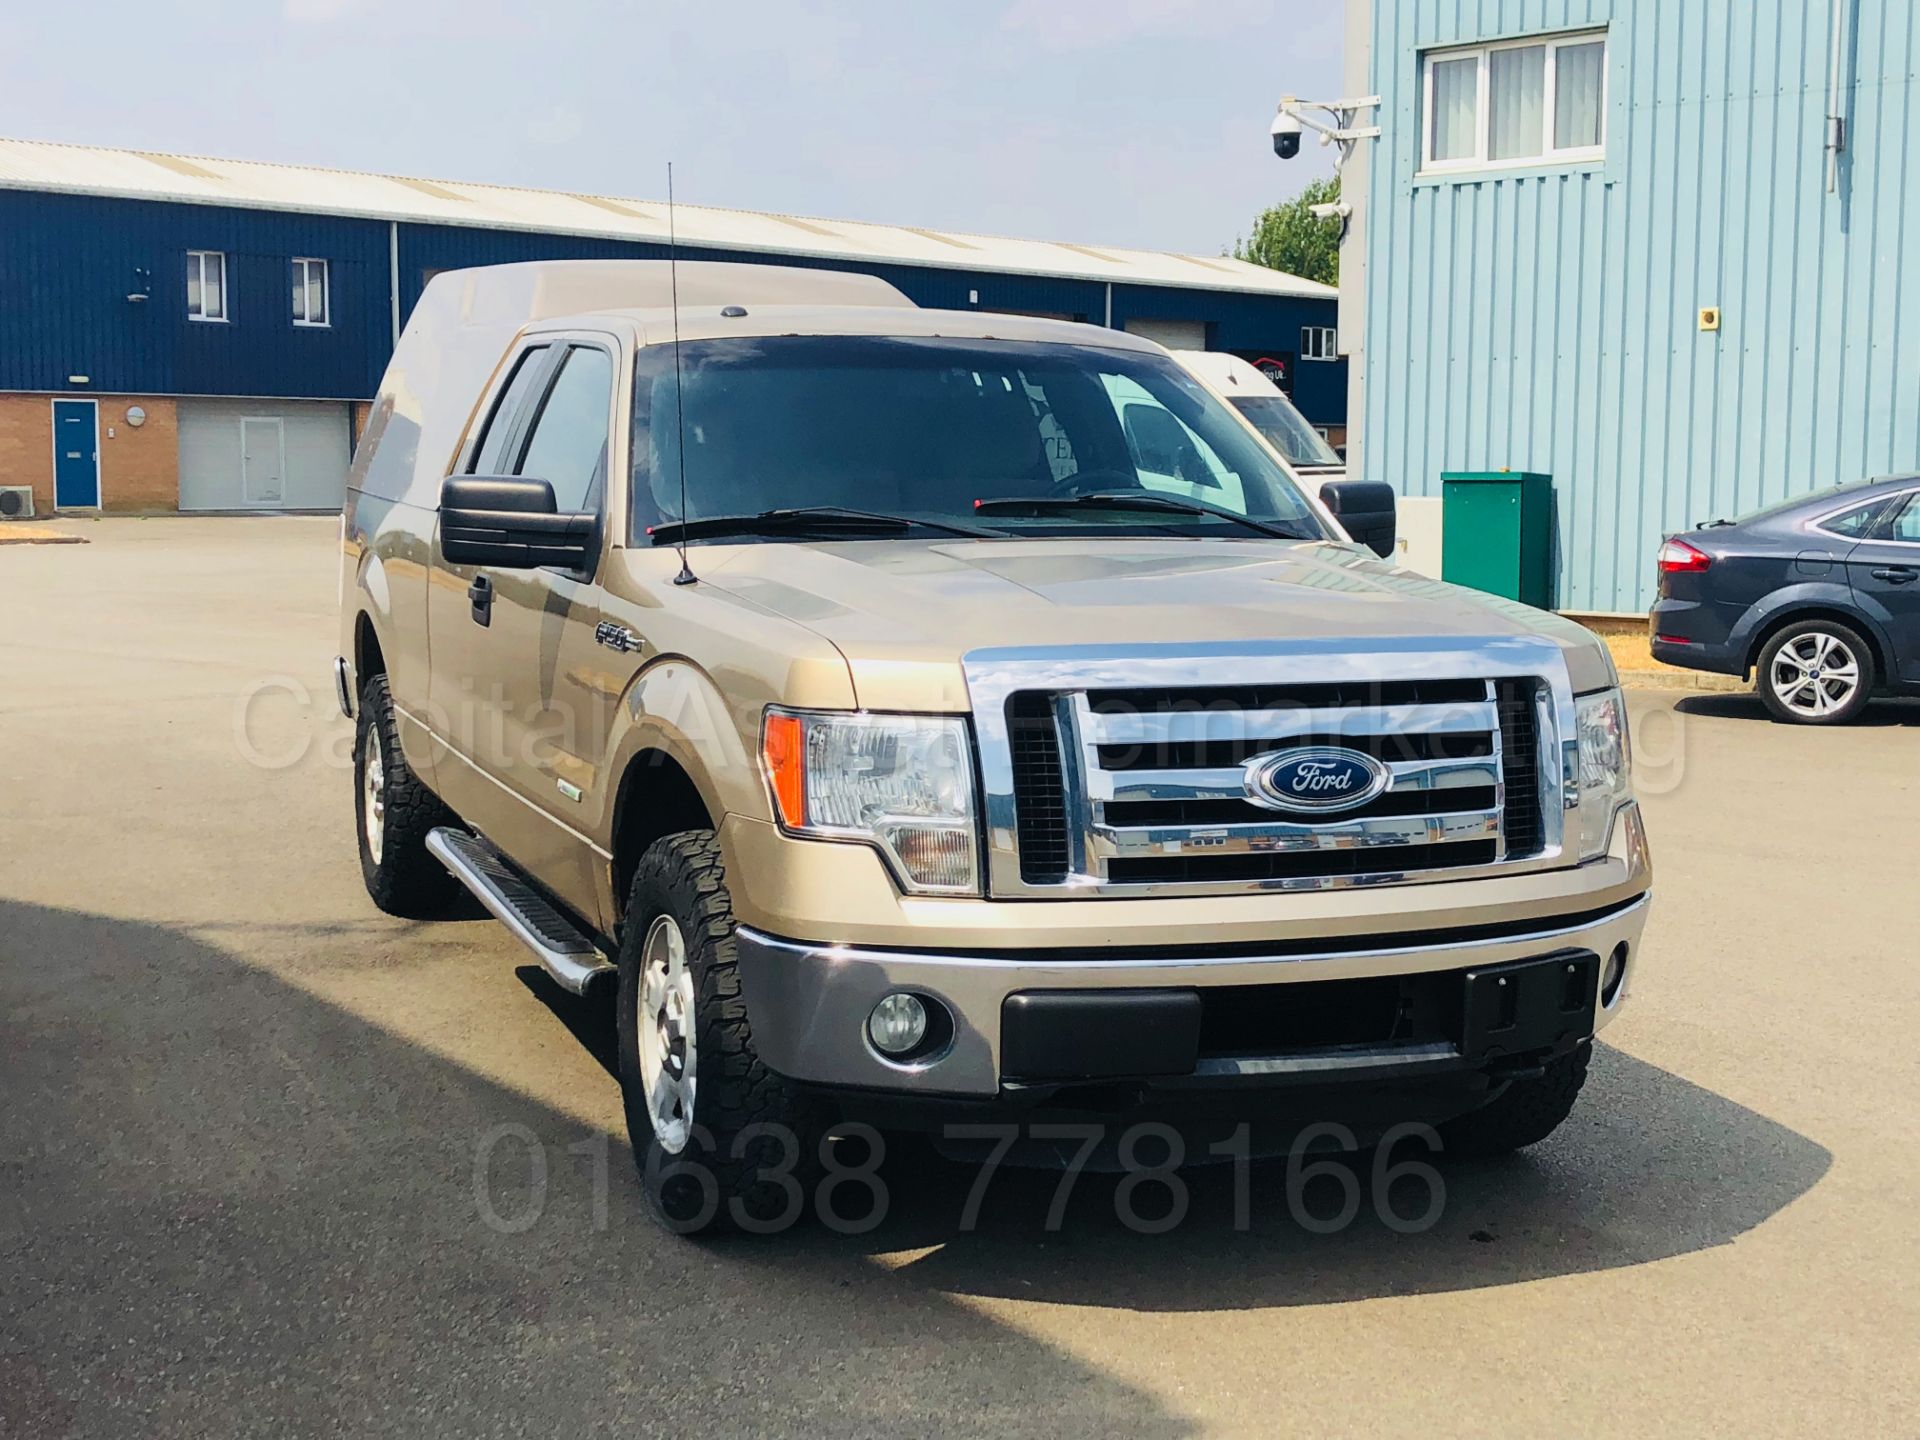 (On Sale) FORD F-150 5.4 V8 XLT EDITION KING-CAB (2012) MODEL**4X4**6 SEATER**AUTOMATIC *TOP SPEC* - Image 5 of 52